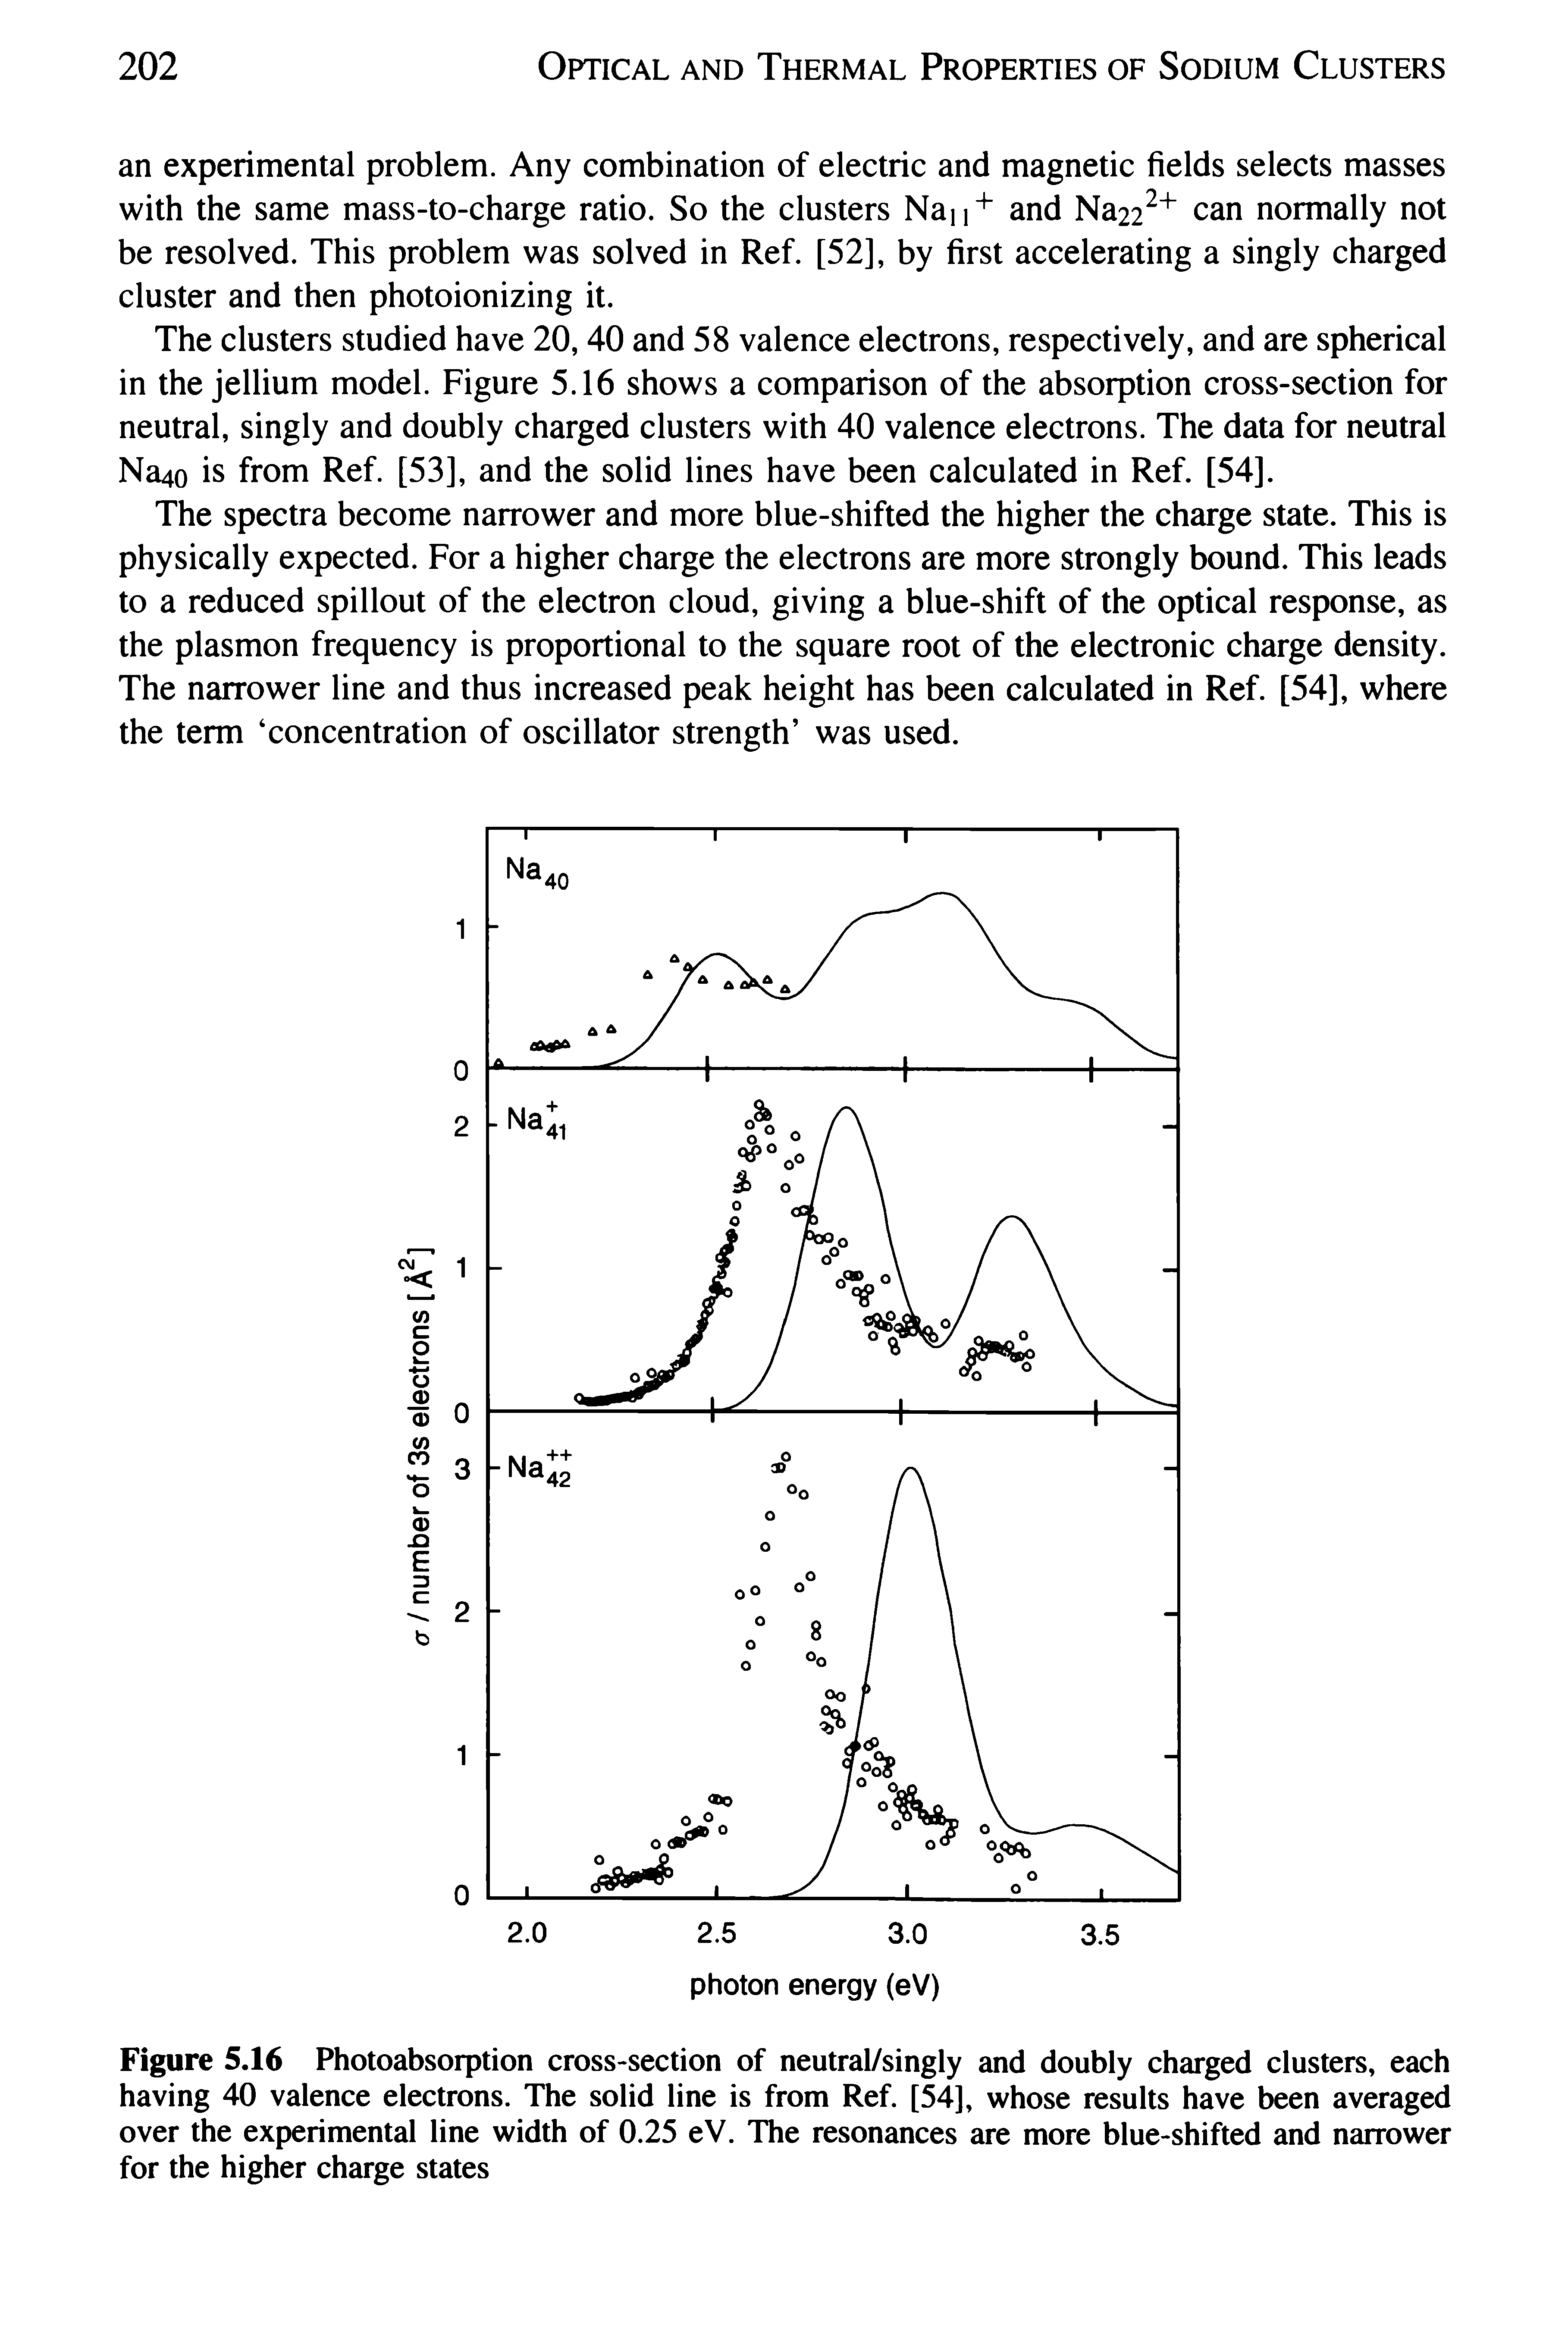 Figure 5.16 Photoabsorption cross-section of neutral/singly and doubly charged clusters, each having 40 valence electrons. The solid line is from Ref. [54], whose results have been averaged over the experimental line width of 0.25 eV. The resonances are more blue-shifted and narrower for the higher charge states...